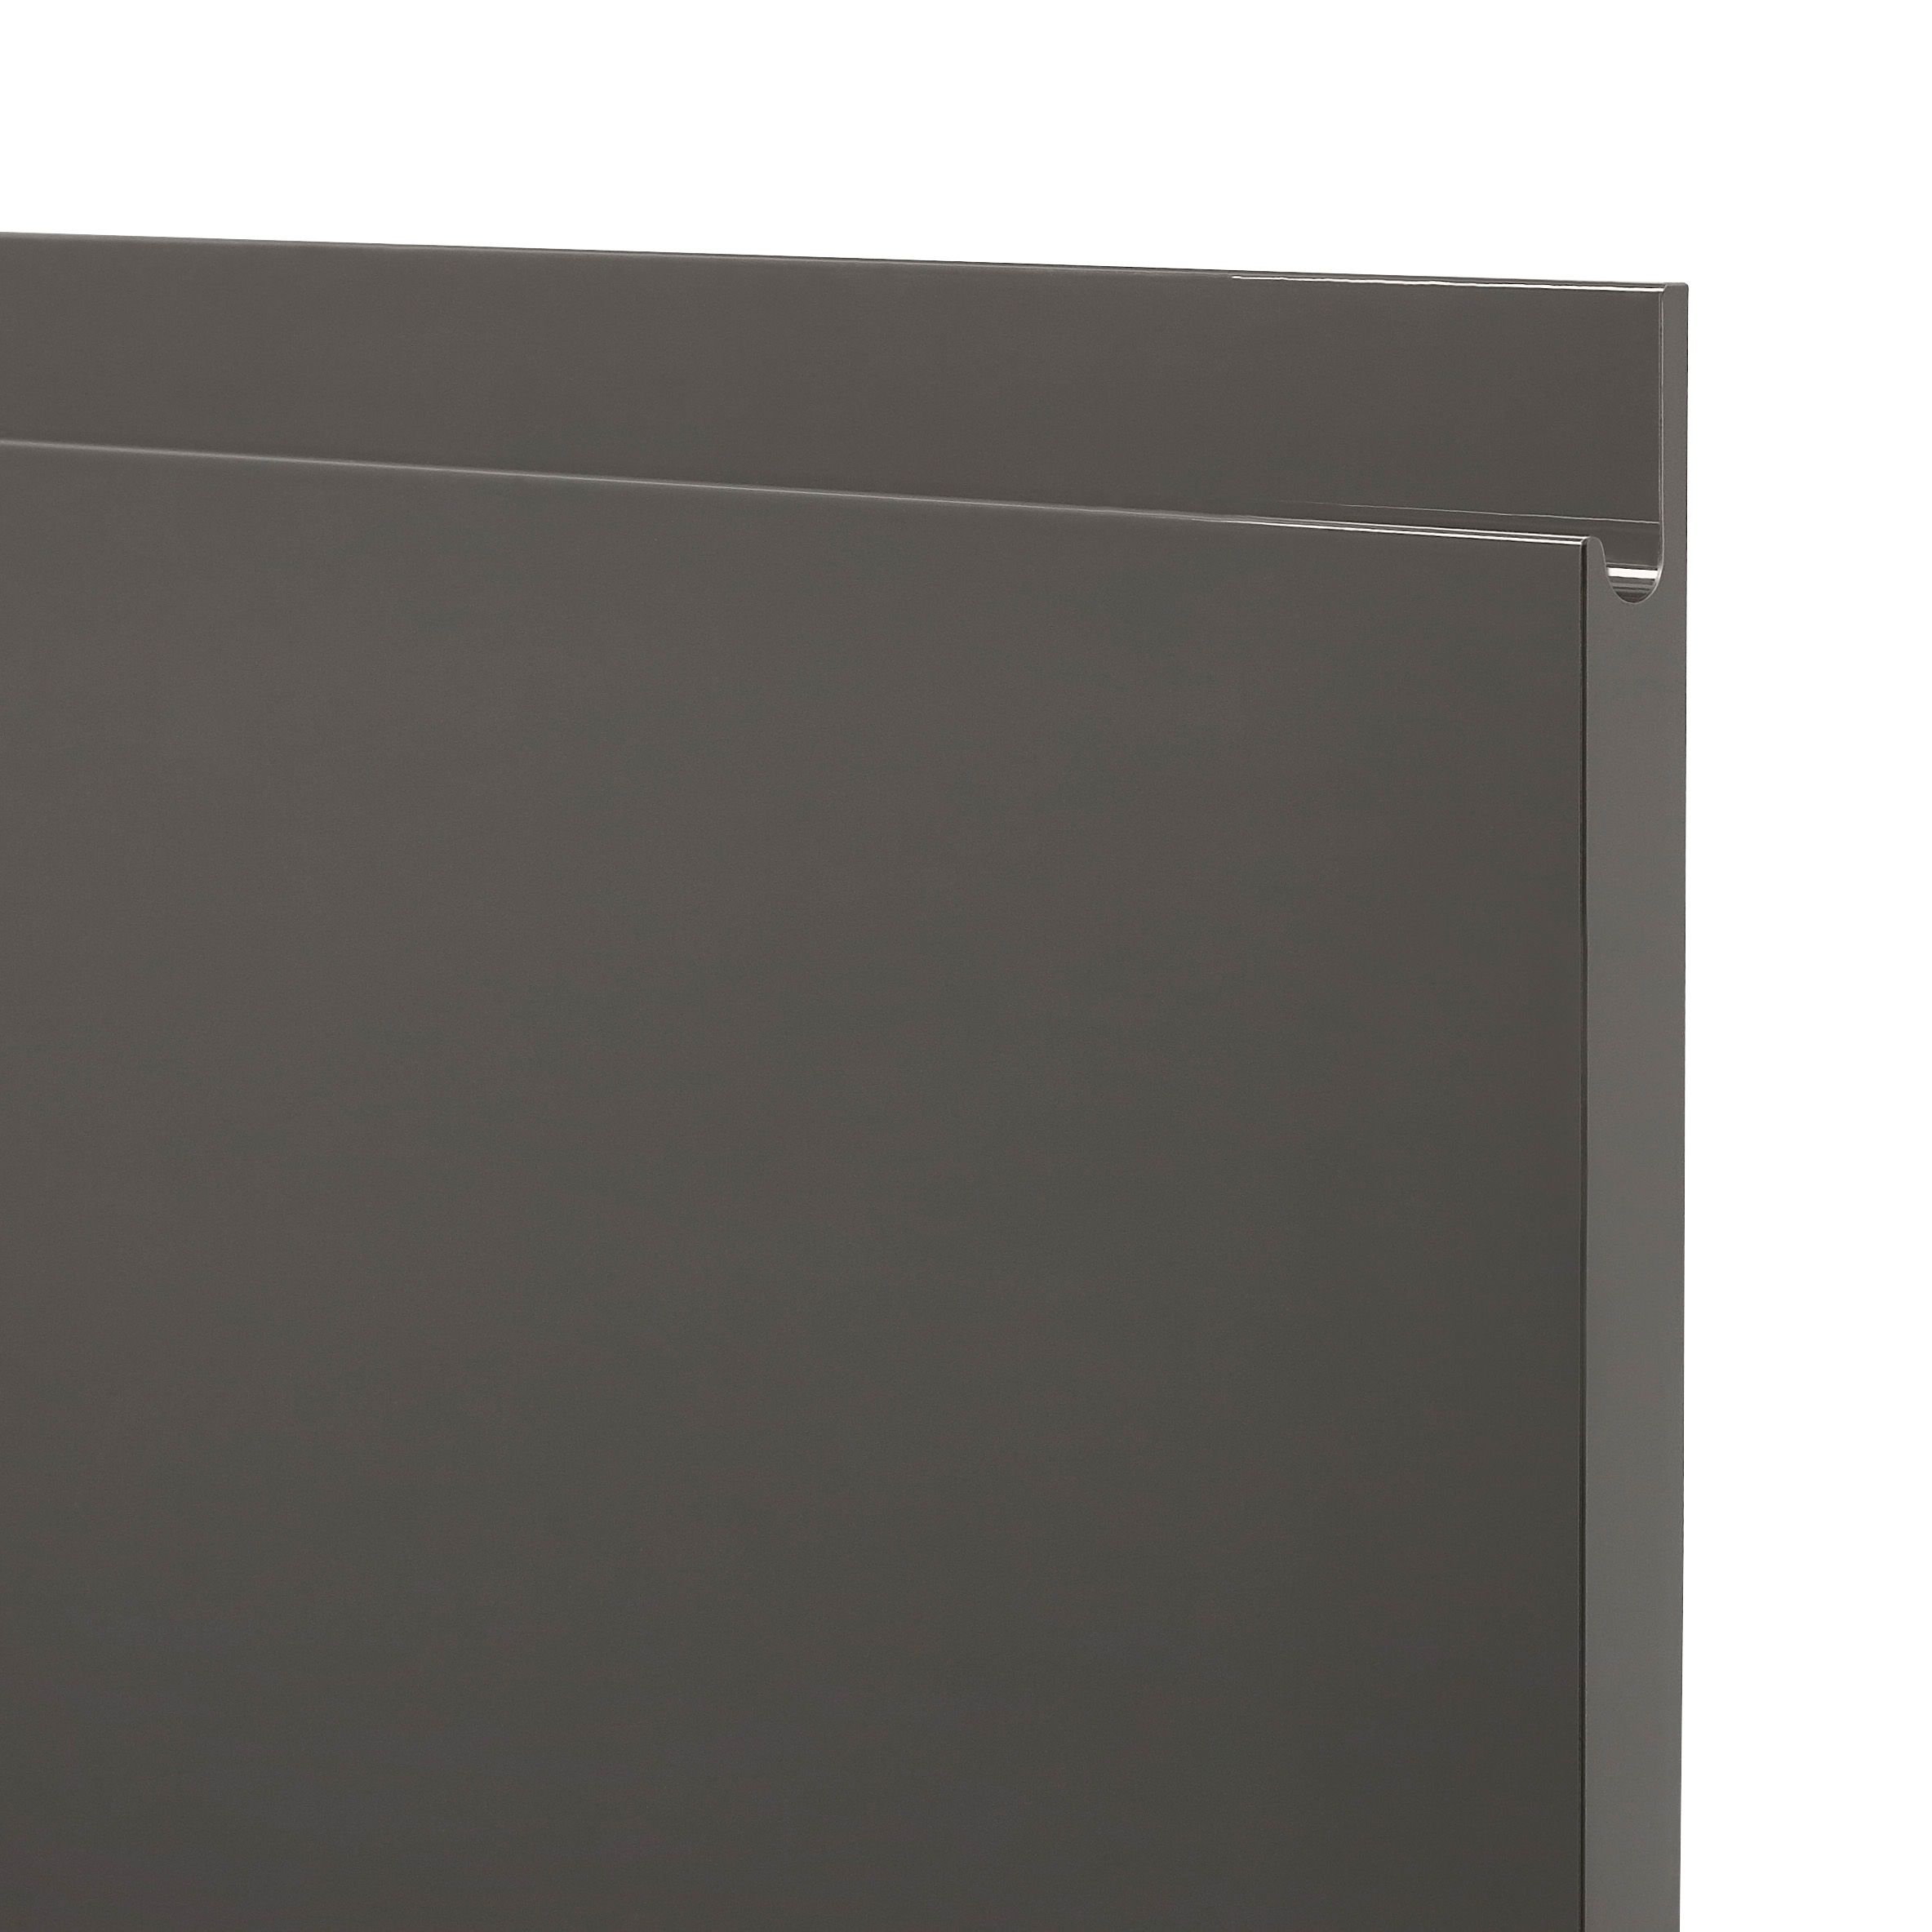 GoodHome Garcinia Gloss anthracite integrated handle Tall appliance Cabinet door (W)600mm (H)633mm (T)19mm